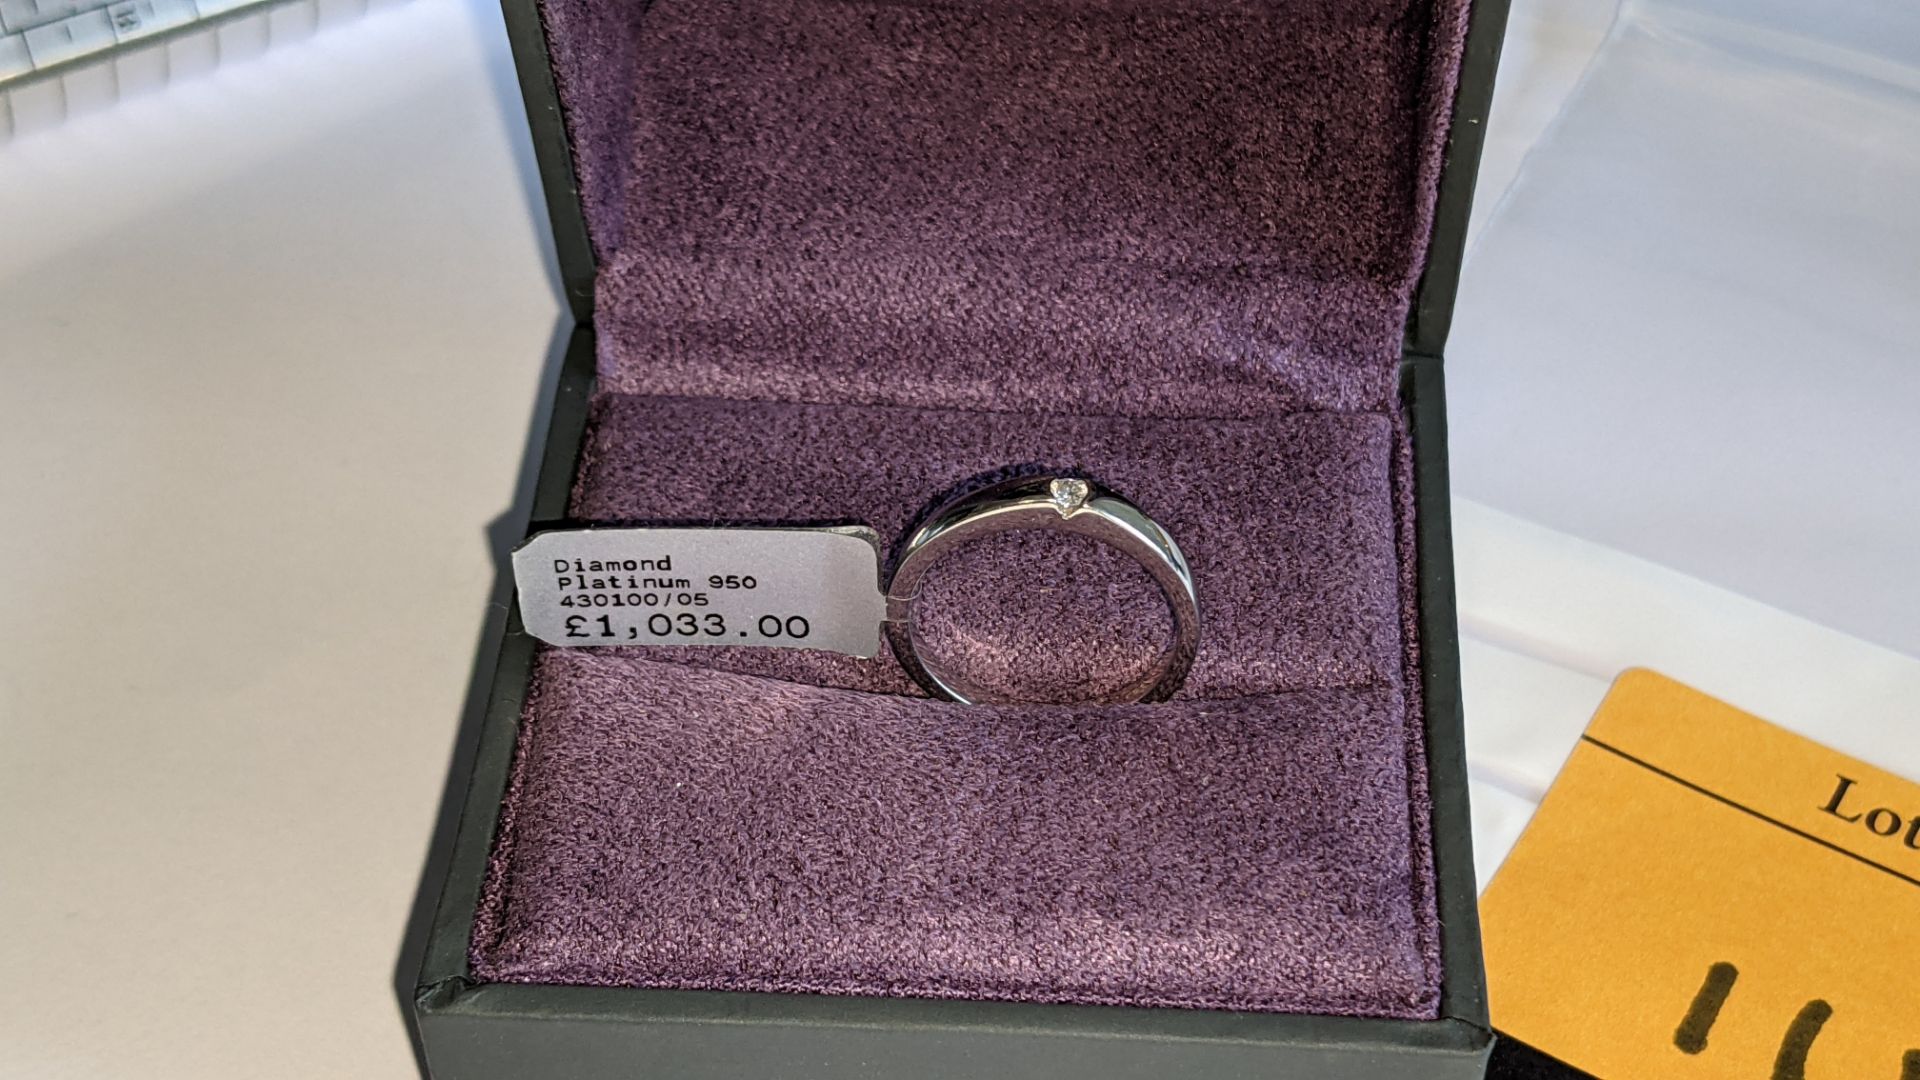 Platinum 950 ring with 0.05ct H/Si diamond. RRP £1,033 - Image 4 of 13